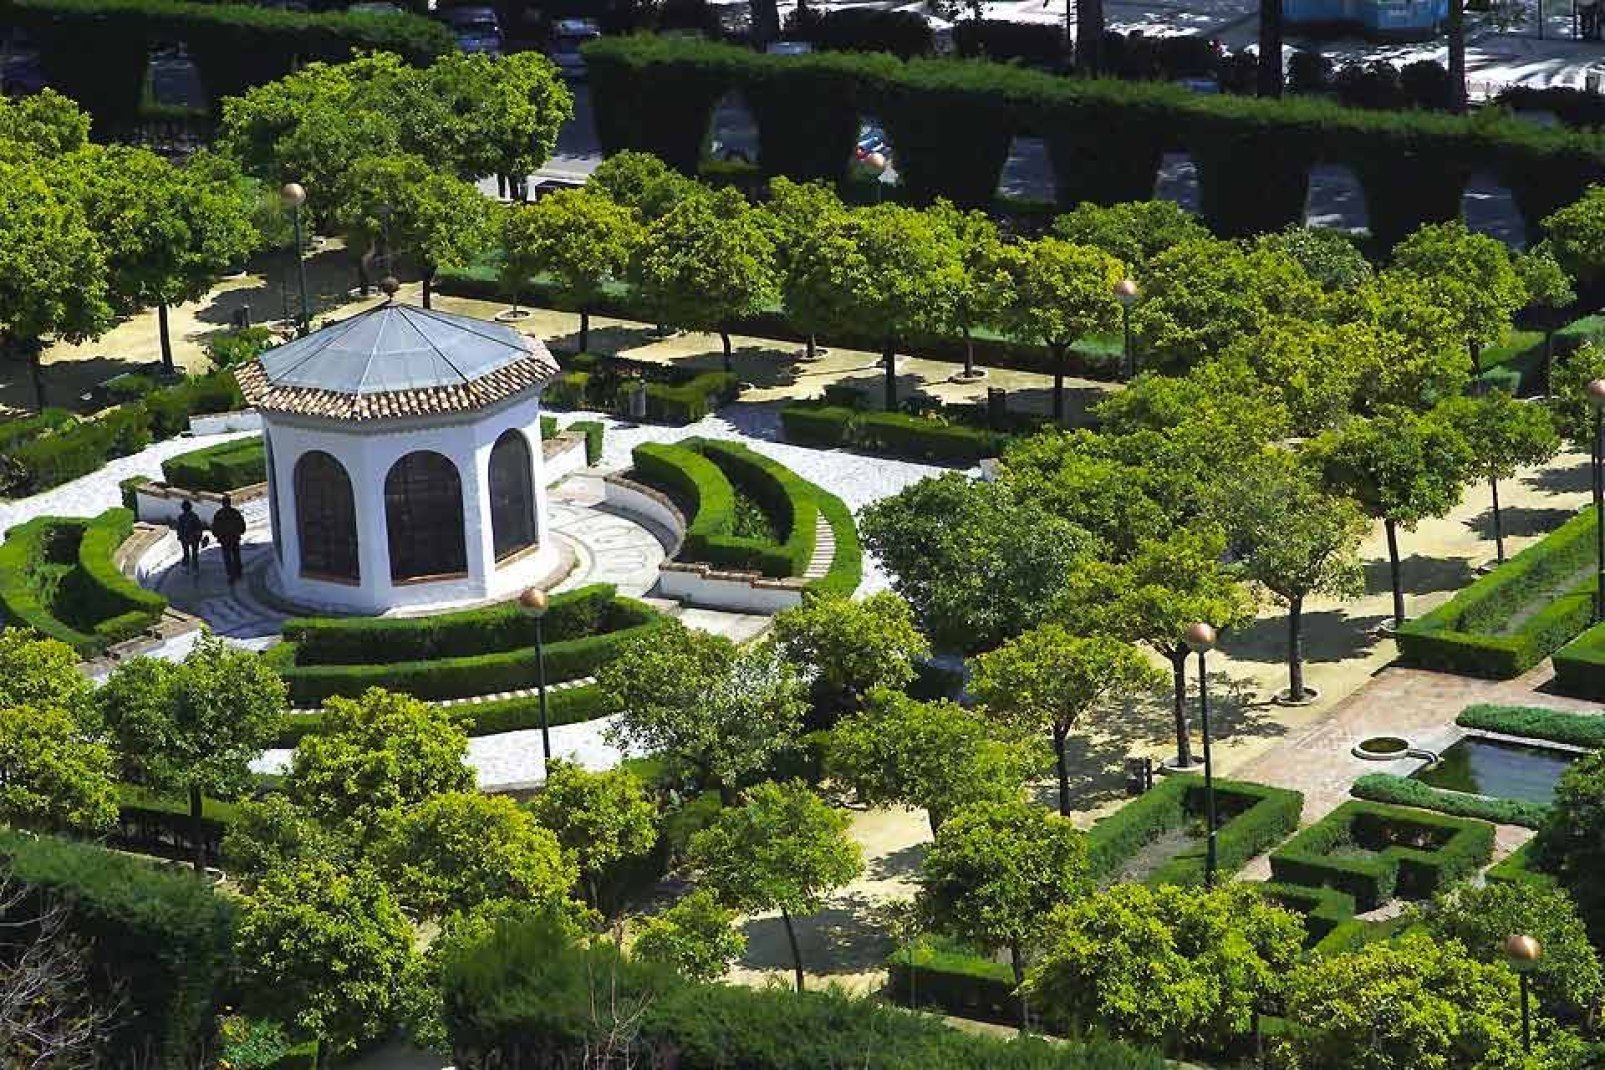 This tropical garden is the biggest and most beautiful one in all of Spain. Located just 3 mi from the city of Malaga, it is a visit you won't soon forget.